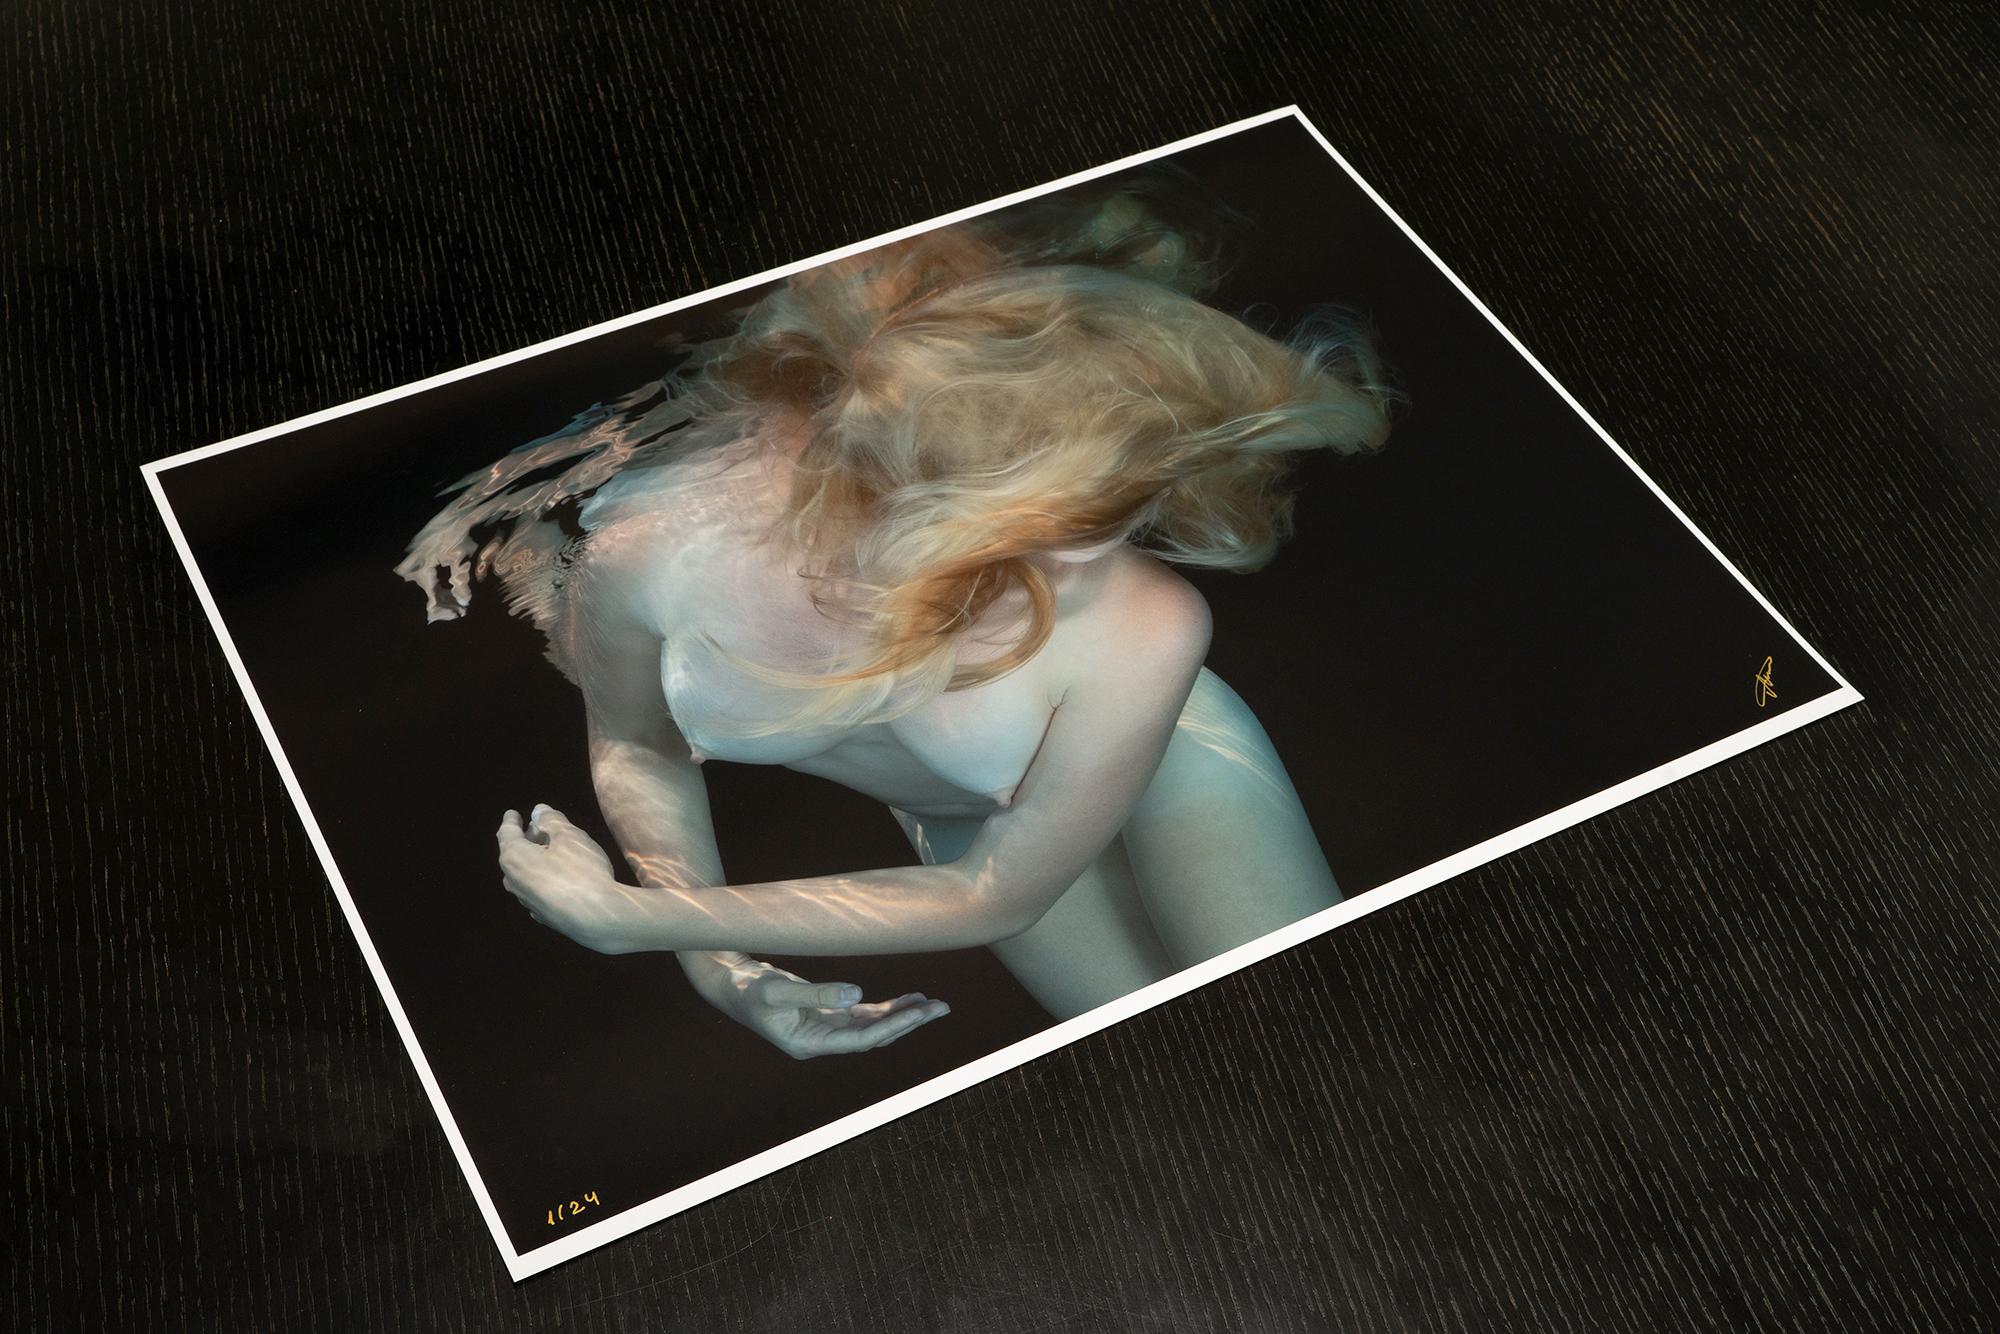 Dancing Mermaid - underwater photograph - archival pigment print - Photograph by Alex Sher